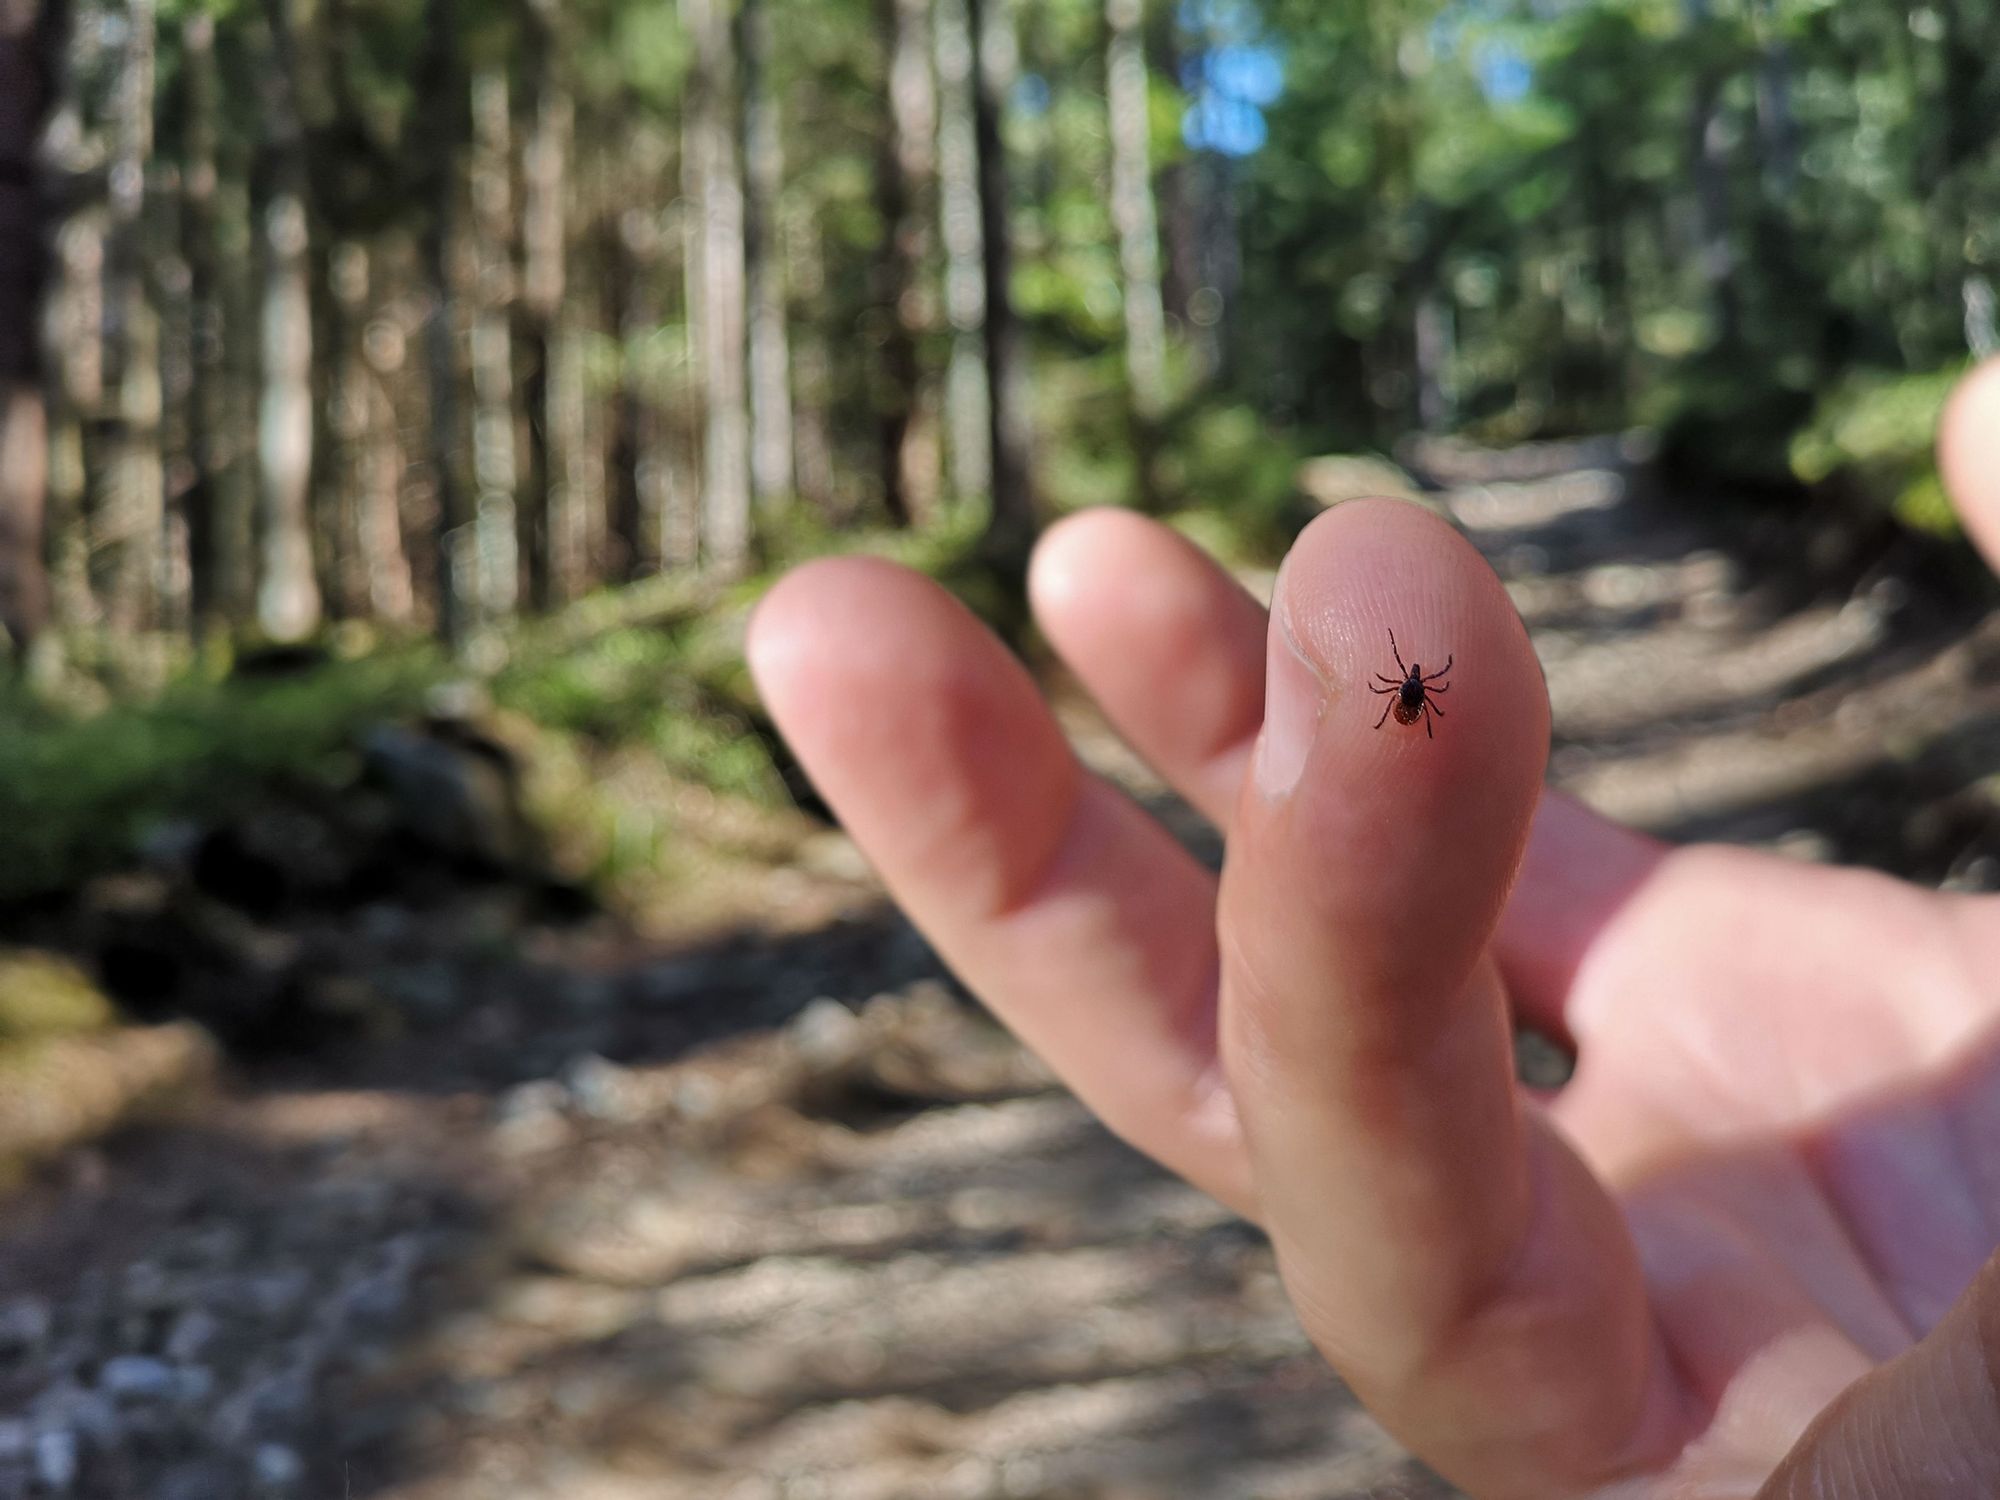 How to Remove a Tick Properly (and Avoid Ticks to Start With)